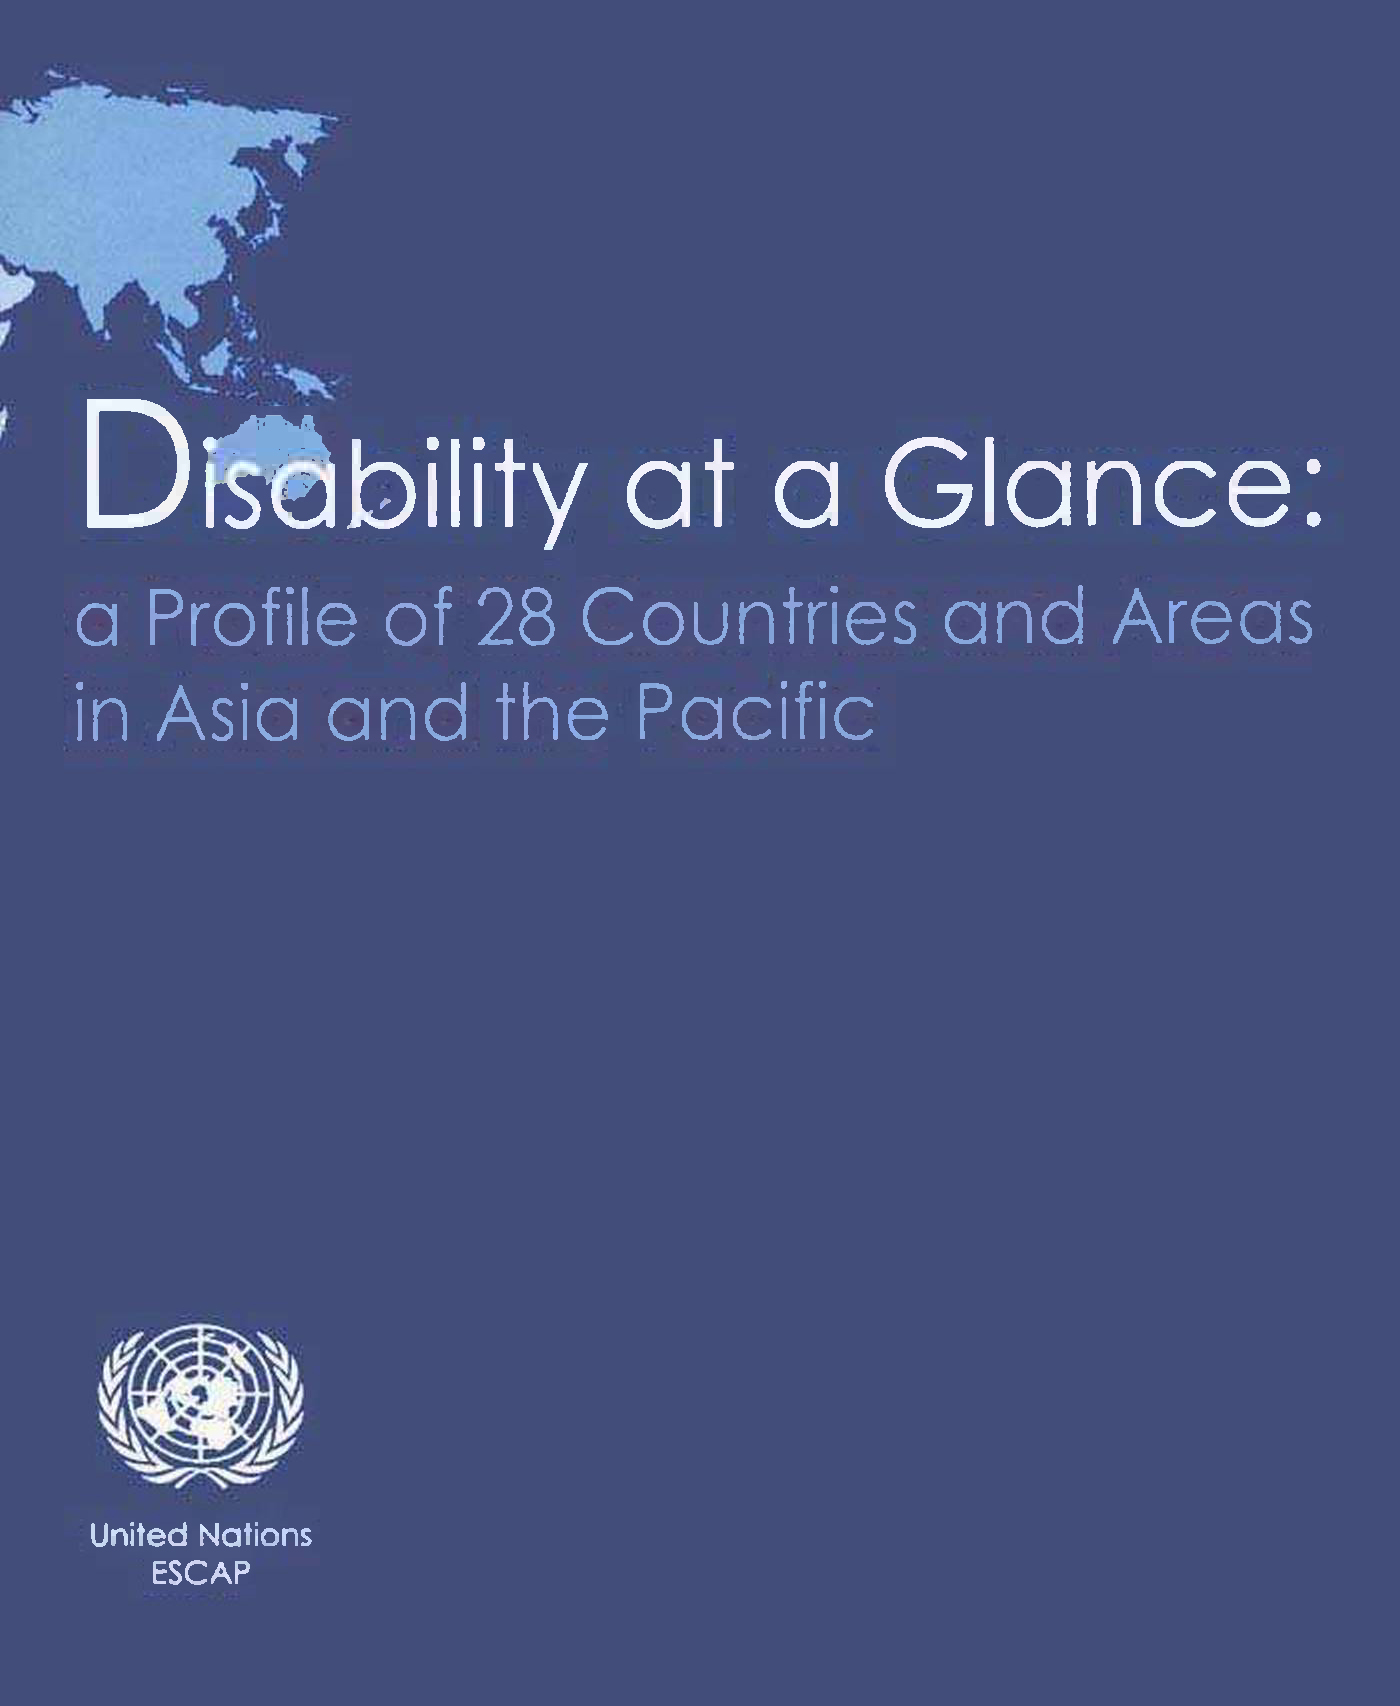 image of Disability at a Glance 2006